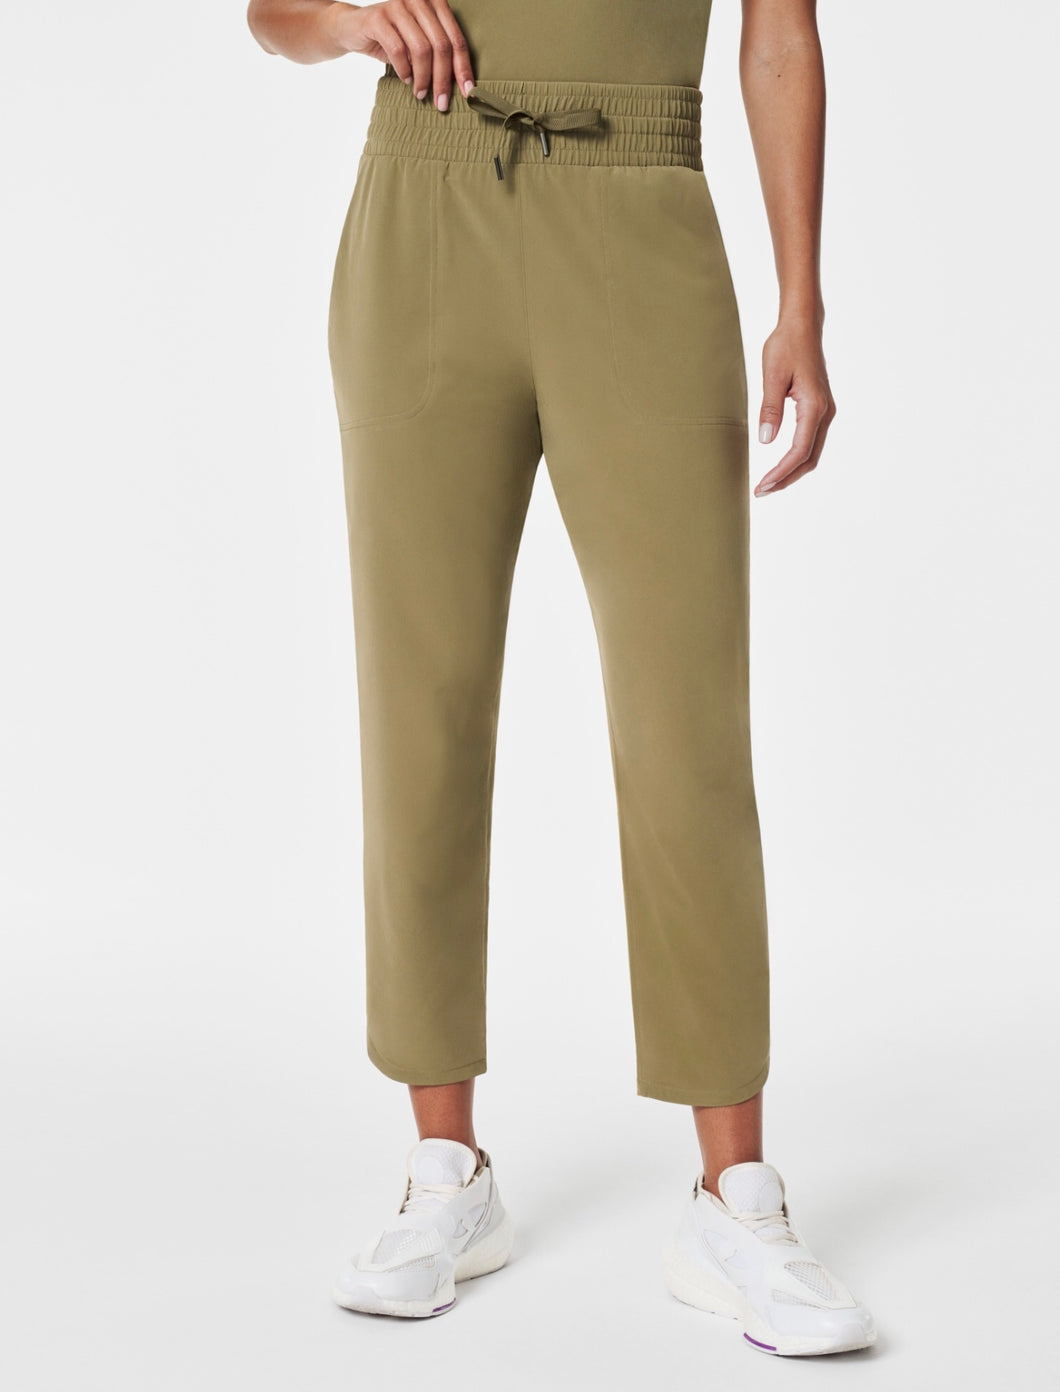 Spanx: Out of Office Trouser in Tuscan Olive 50678R